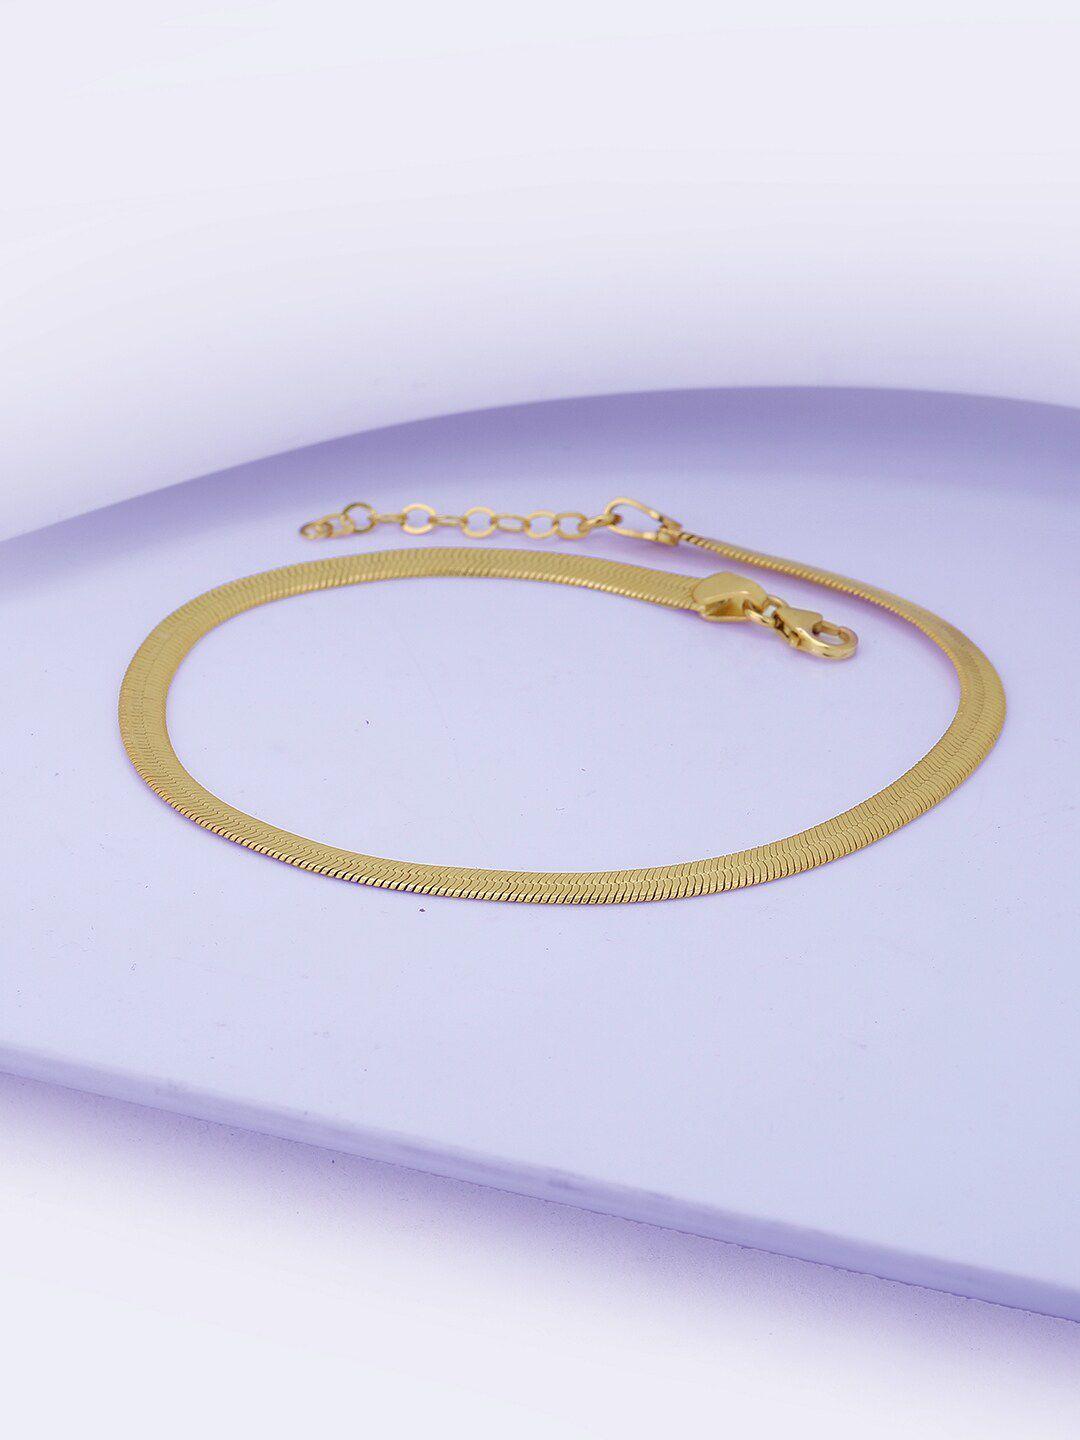 carlton-london-gold-plated-anklet